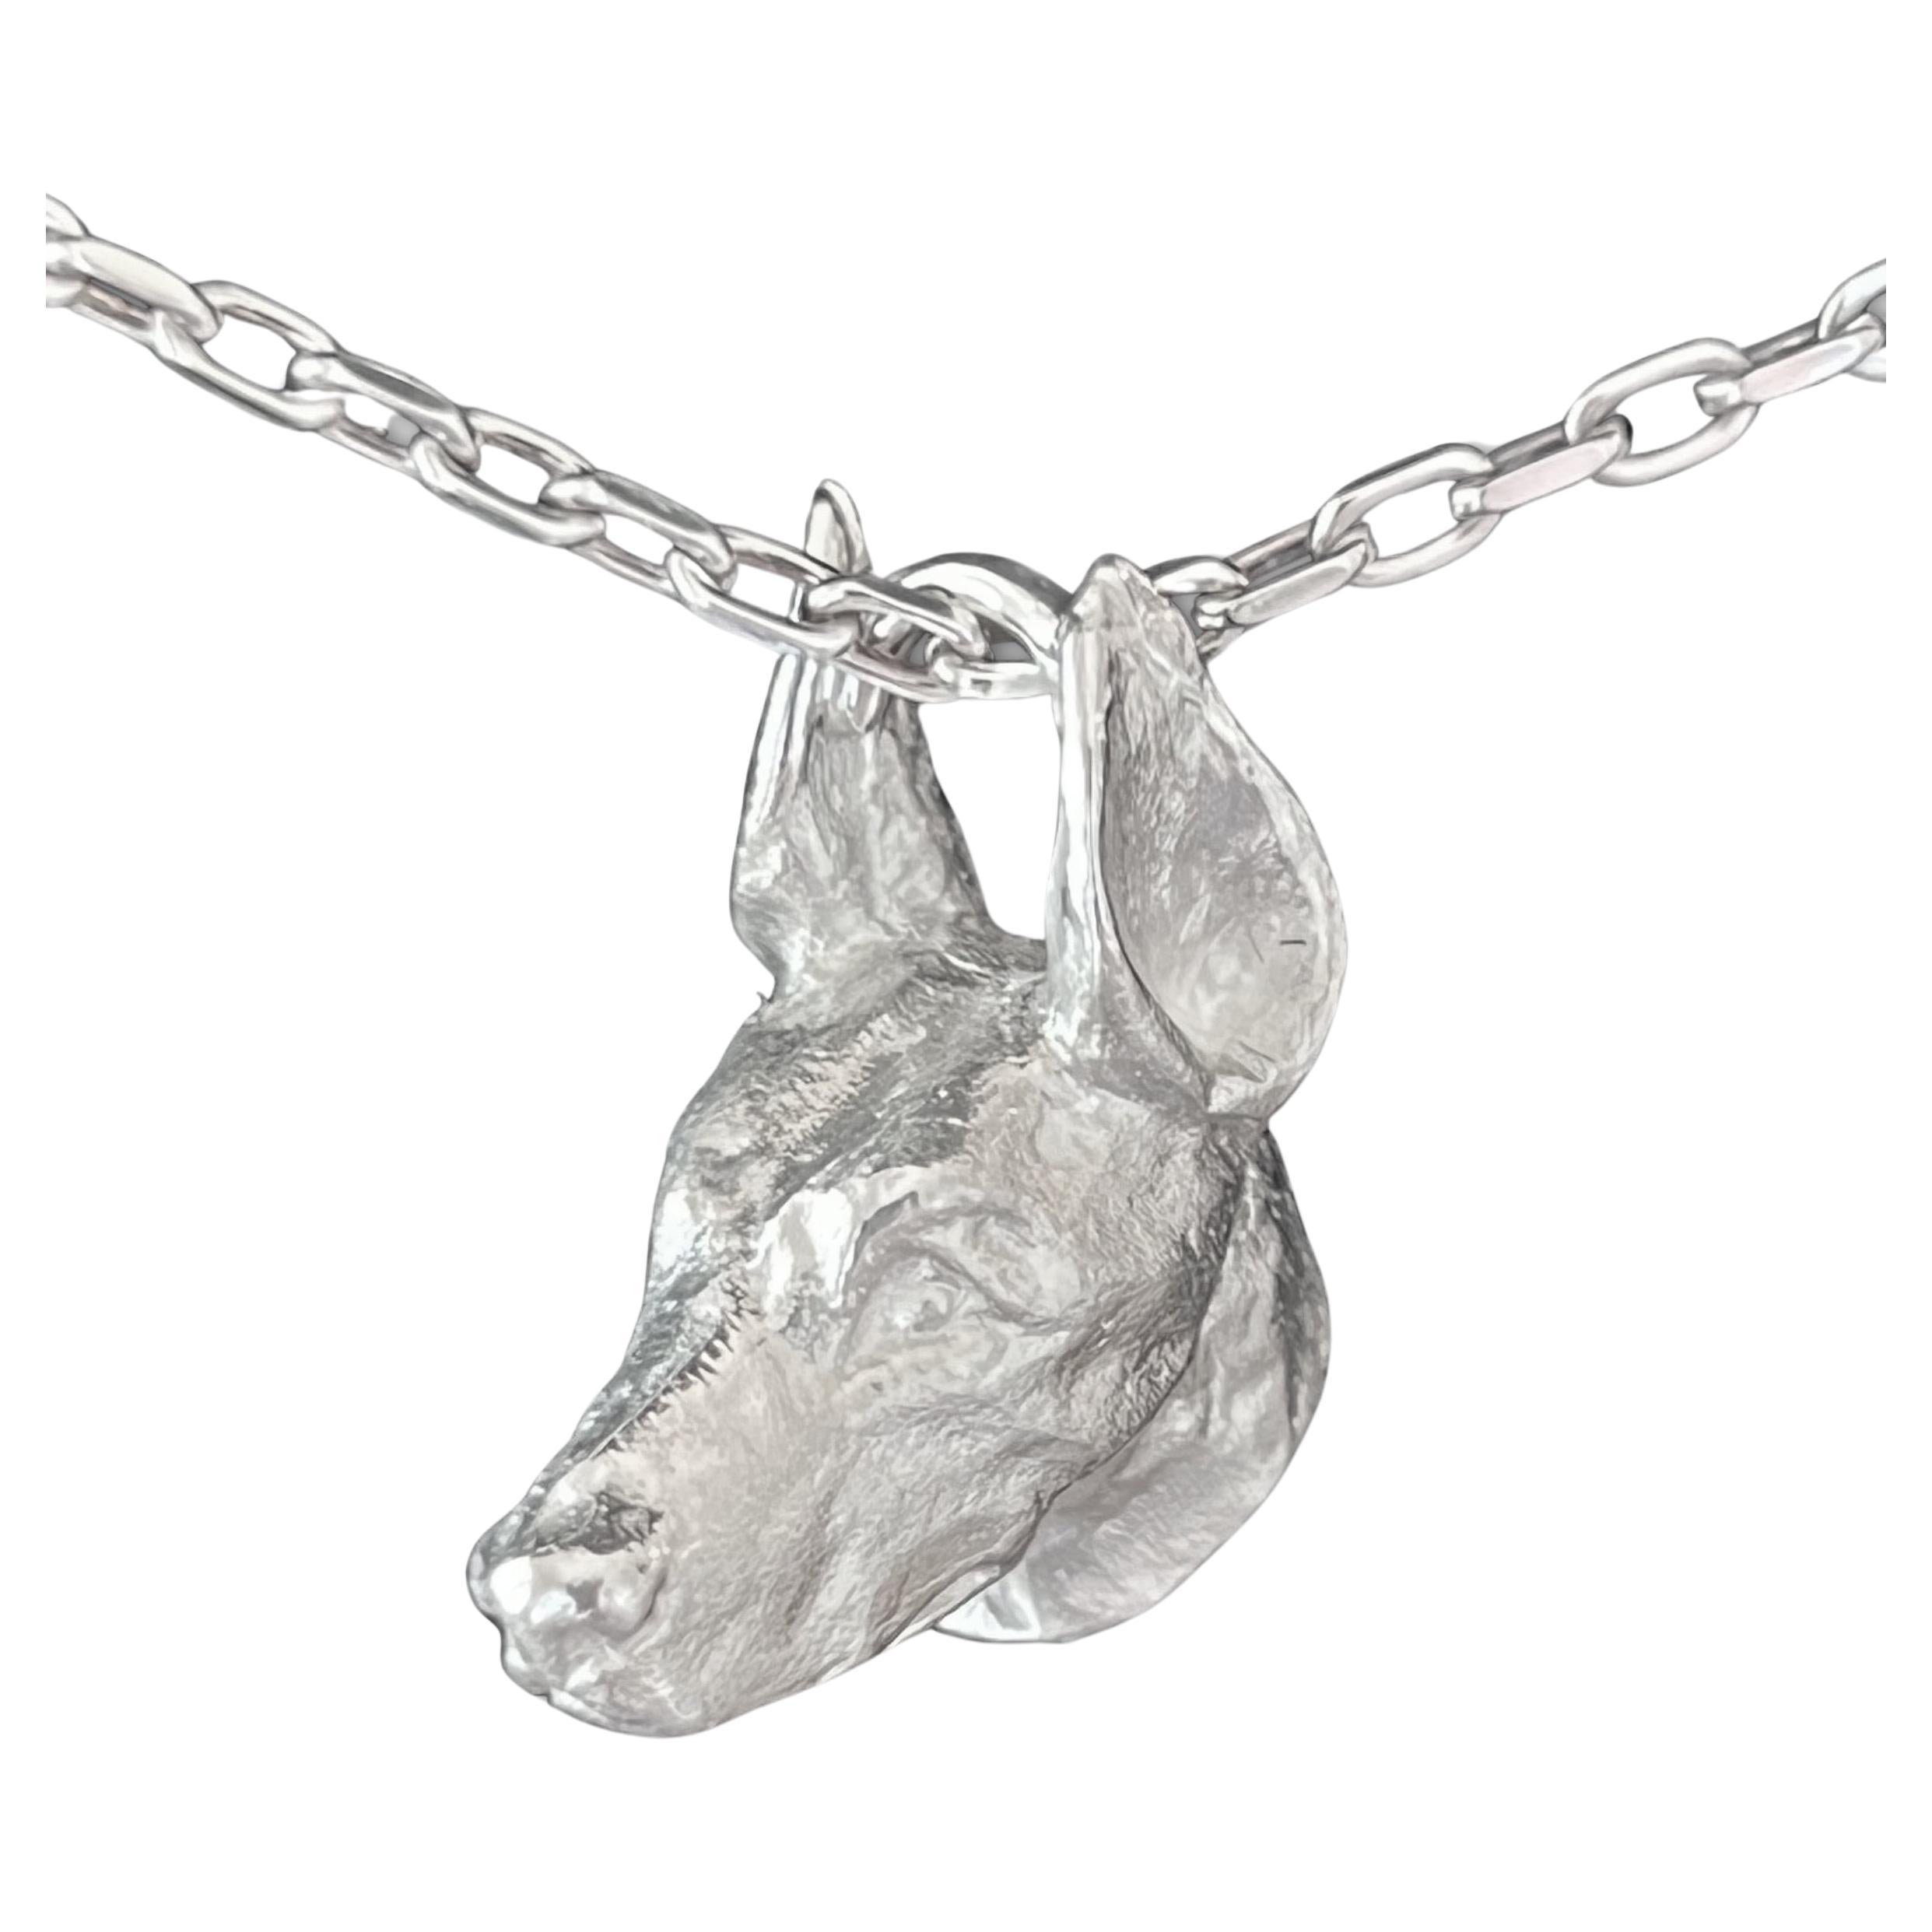 Paul Eaton Sculpted Doberman Dog Head in Sterling Silver Charm or Pendant  For Sale